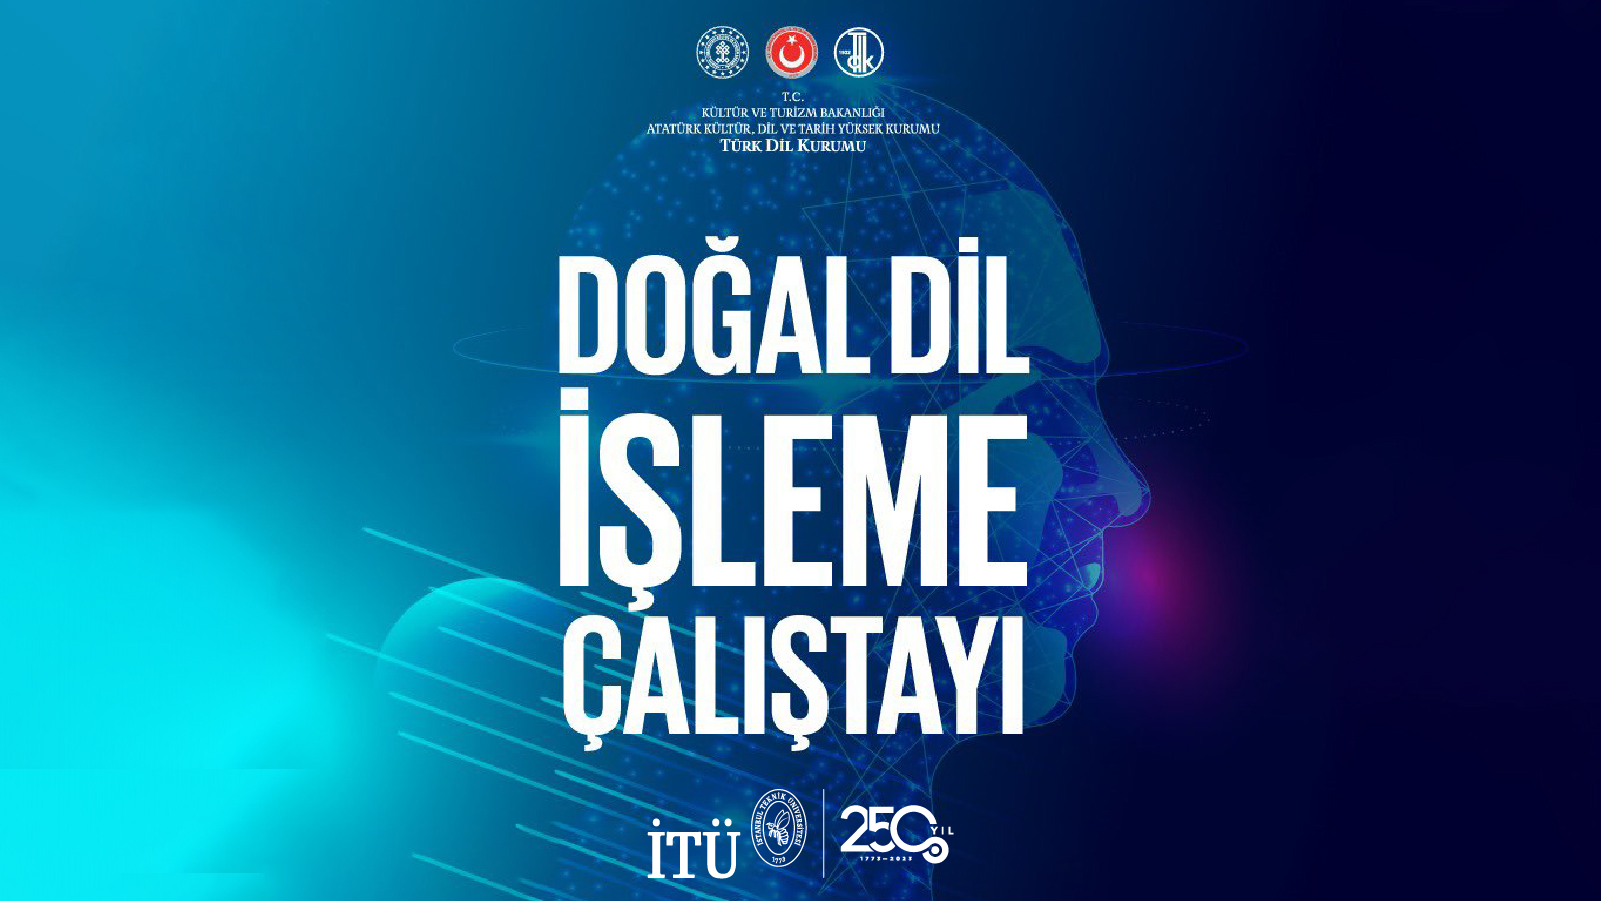 dogal-dil-isleme-calistay-tw